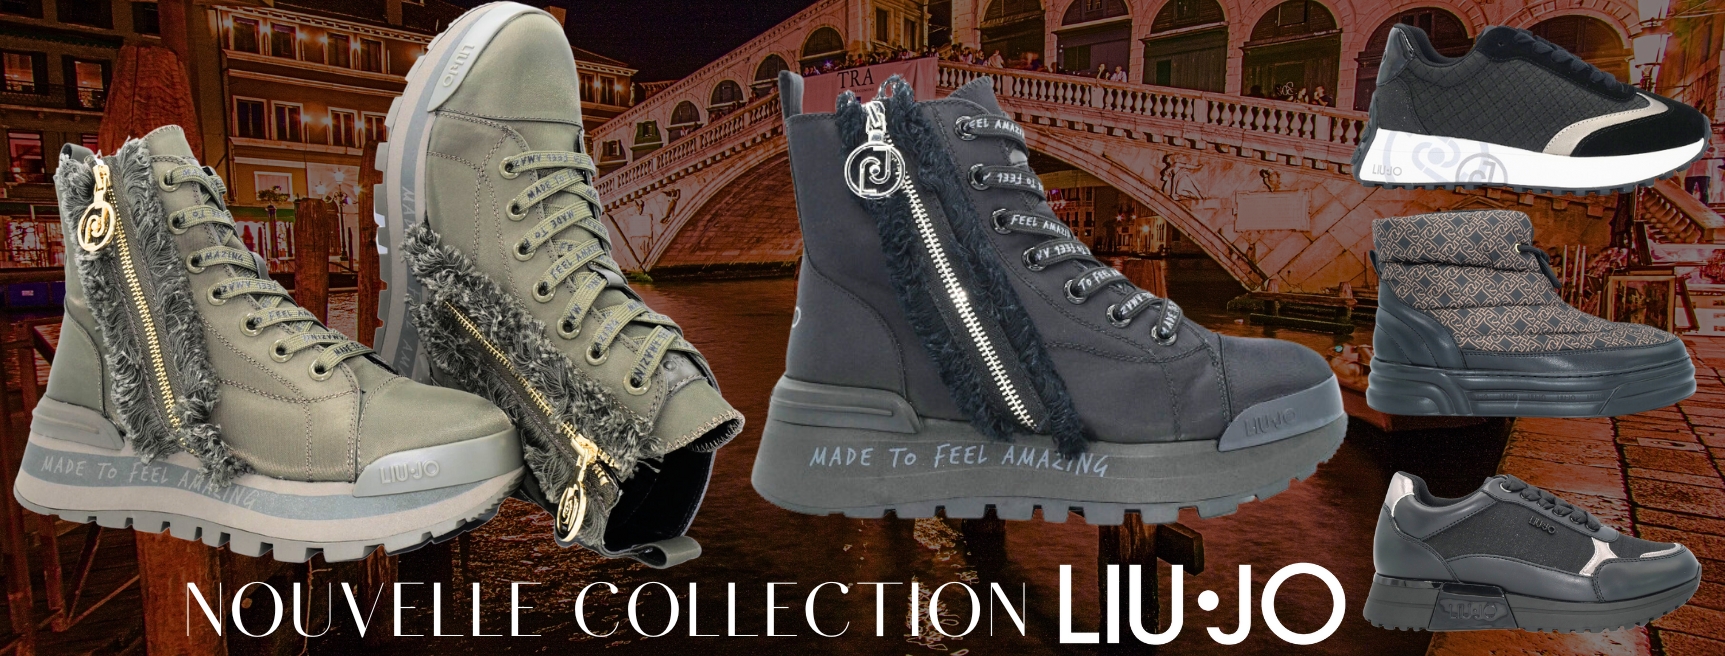 NOUVELLE COLLECTION HIVER LIUJO SHOES 